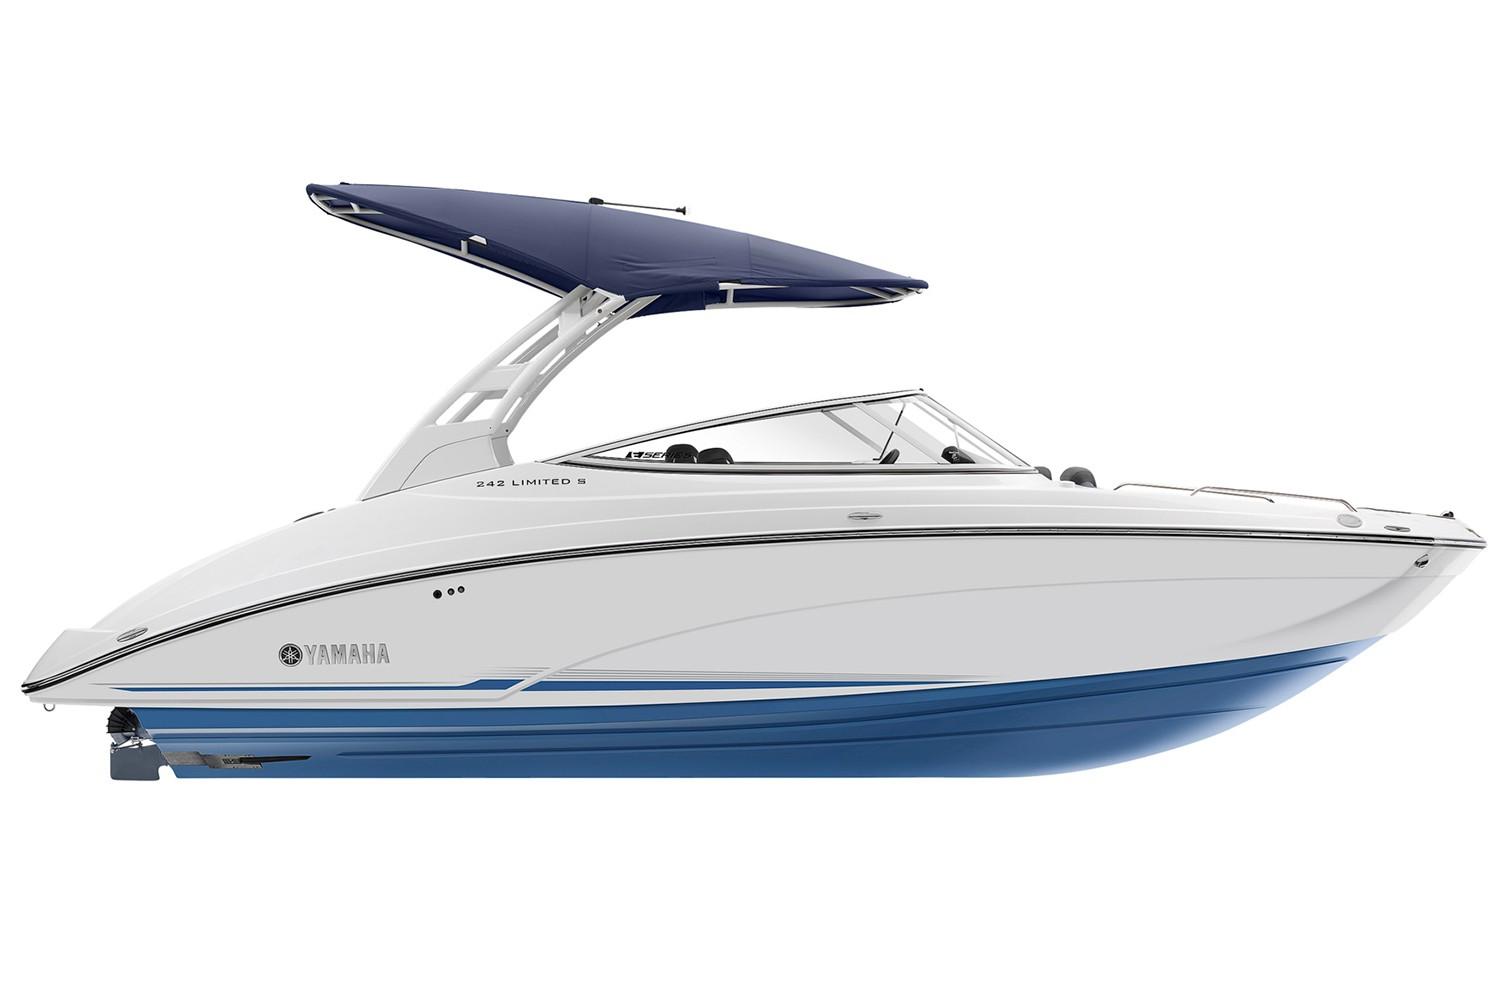 2019 Yamaha 242 Limited S E-Series in Gulfport, Mississippi - Photo 20